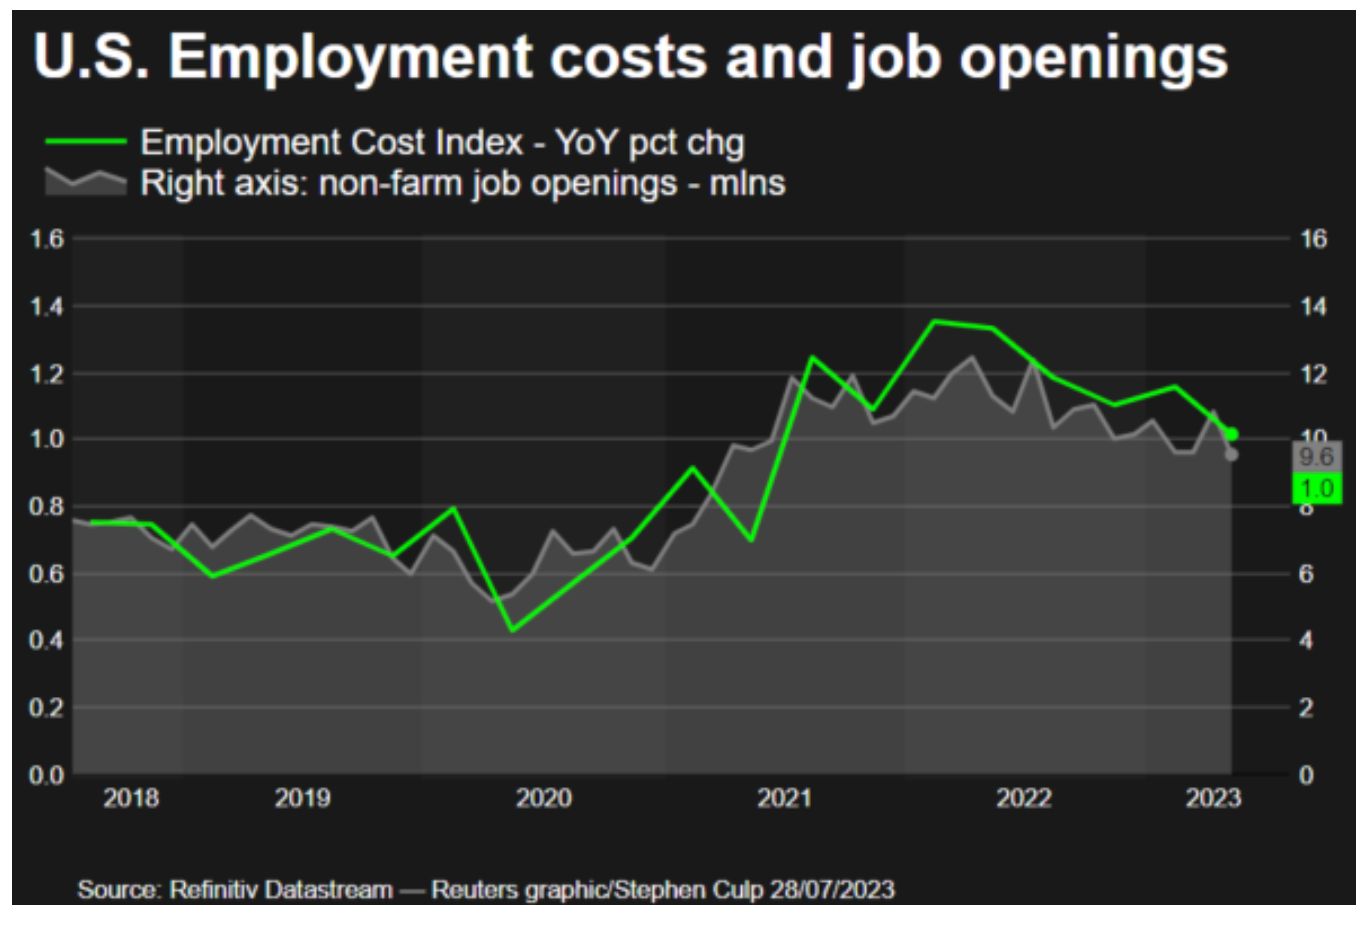 US employment cost black graph with green line